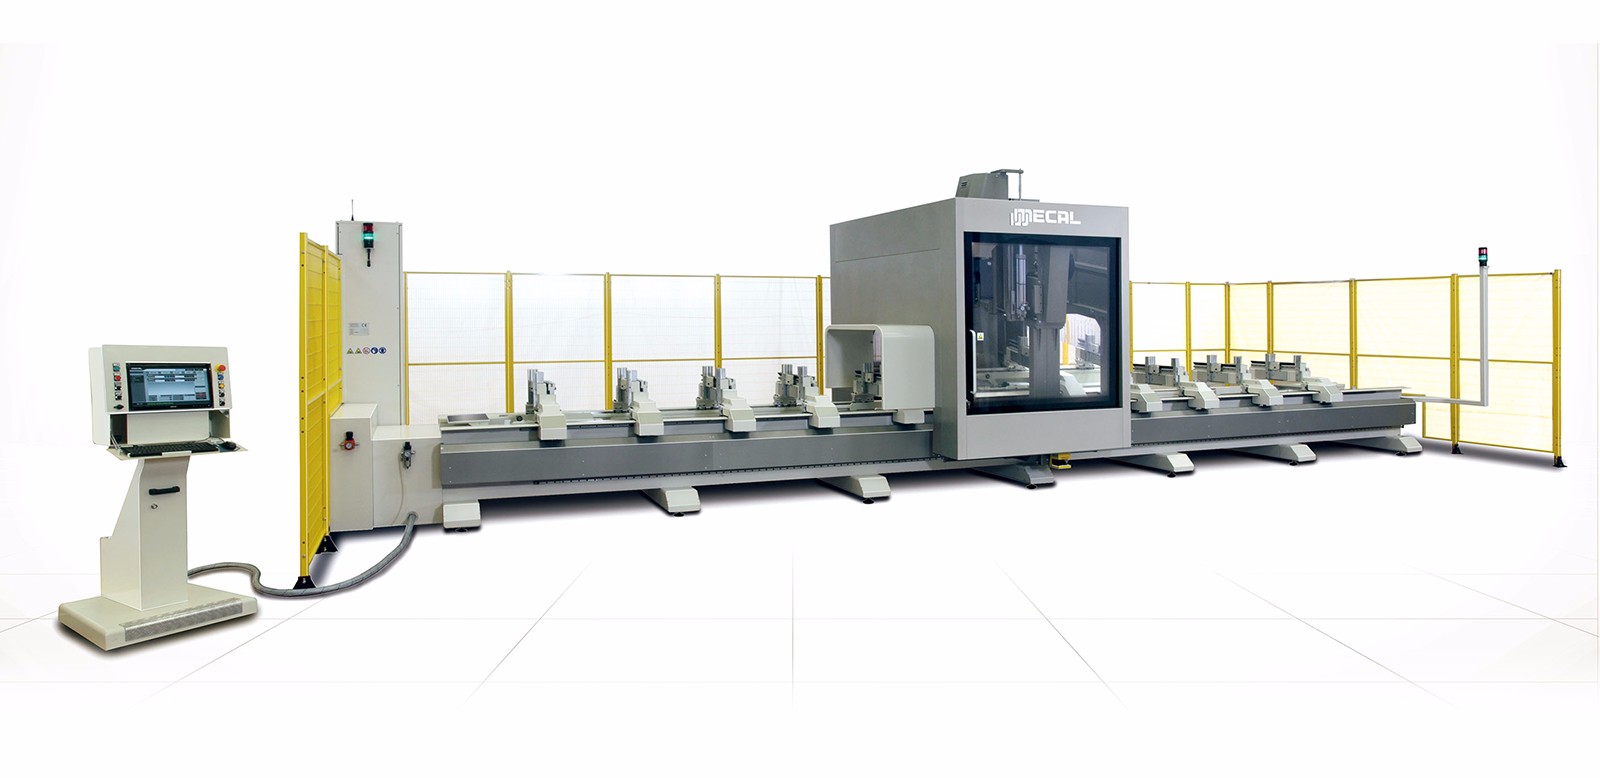 5-Ise-axis njikọ CNC machining center